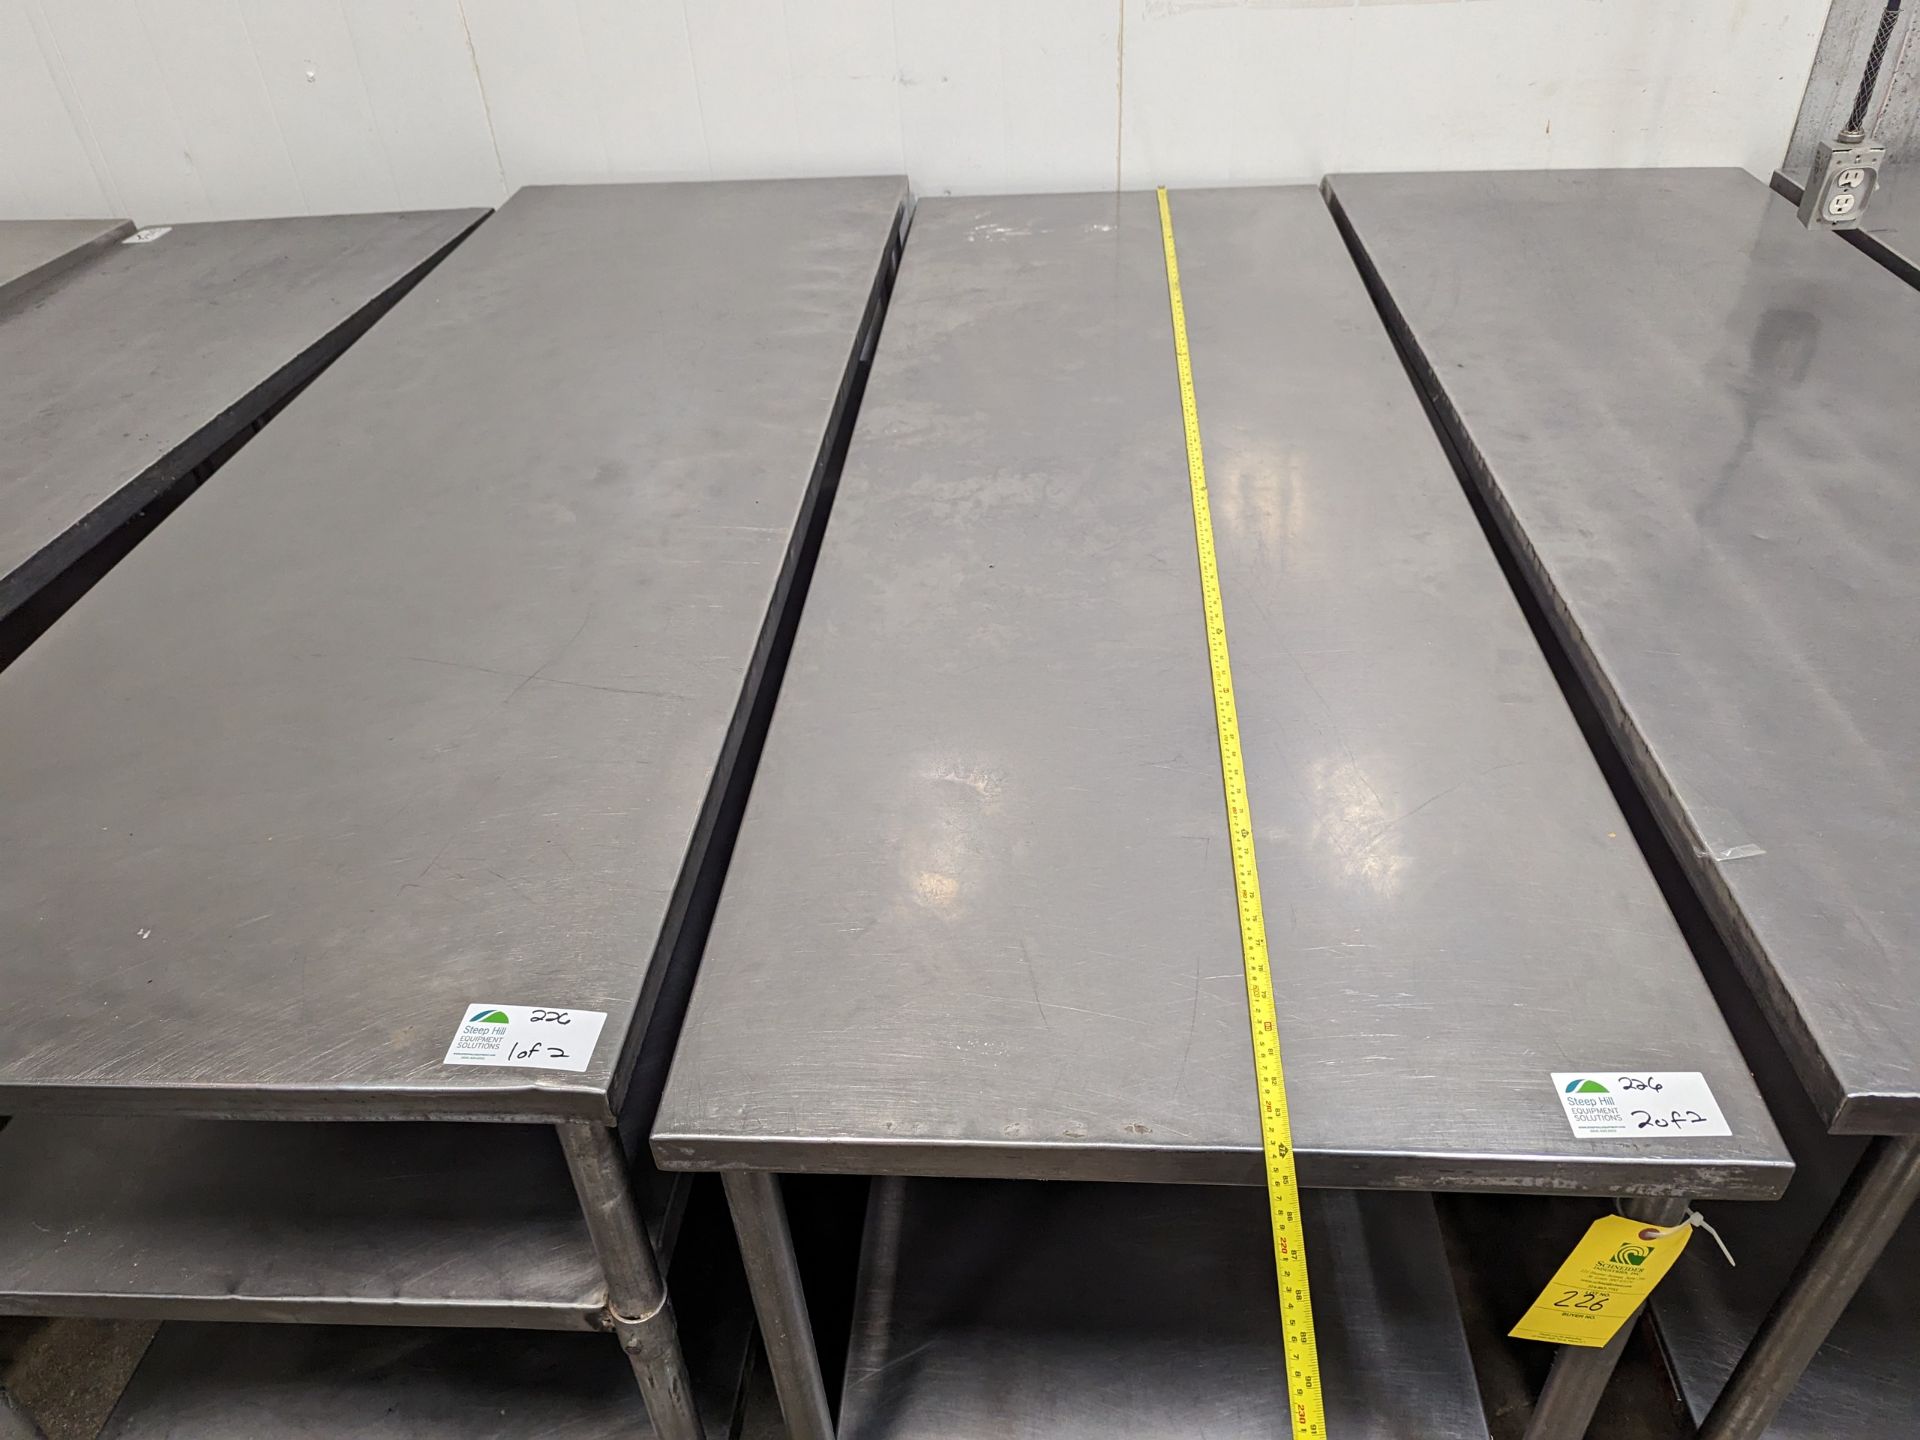 Lot of 2 7ft Long SS Tables, Dimensions LxWxH: 84x30x36 each - Image 2 of 6